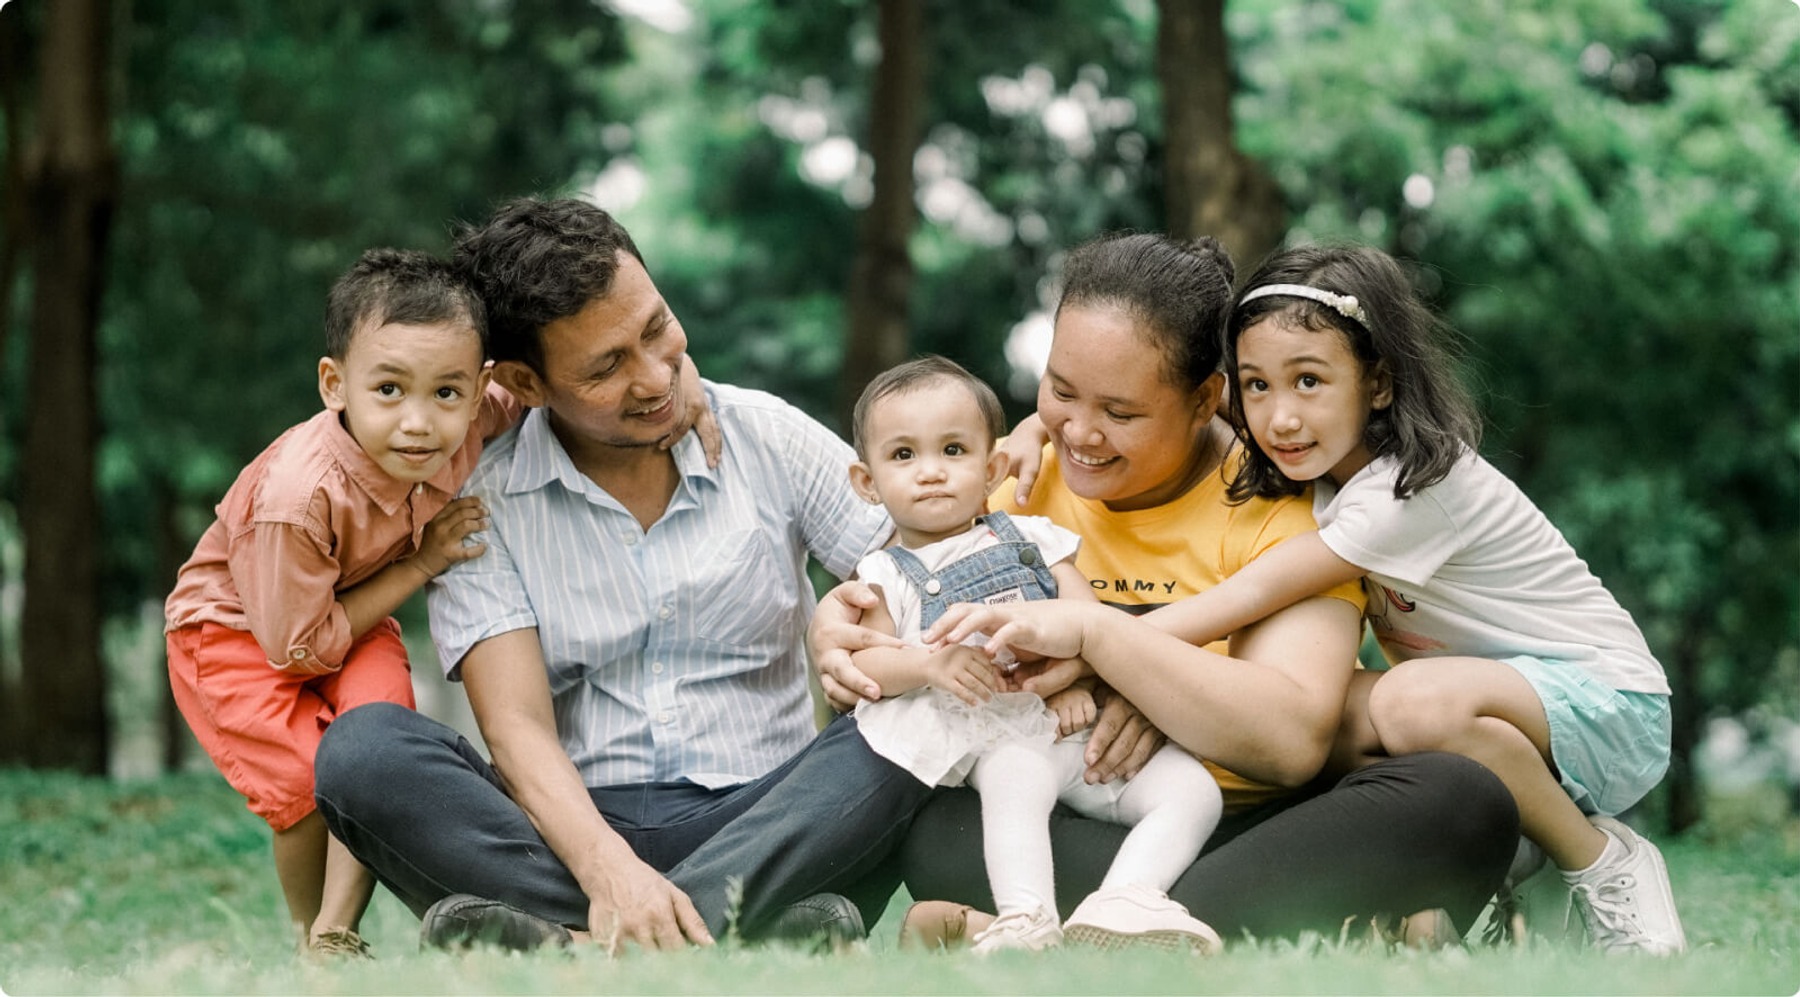 A family of five sits in the grass and smiles for a photographer.